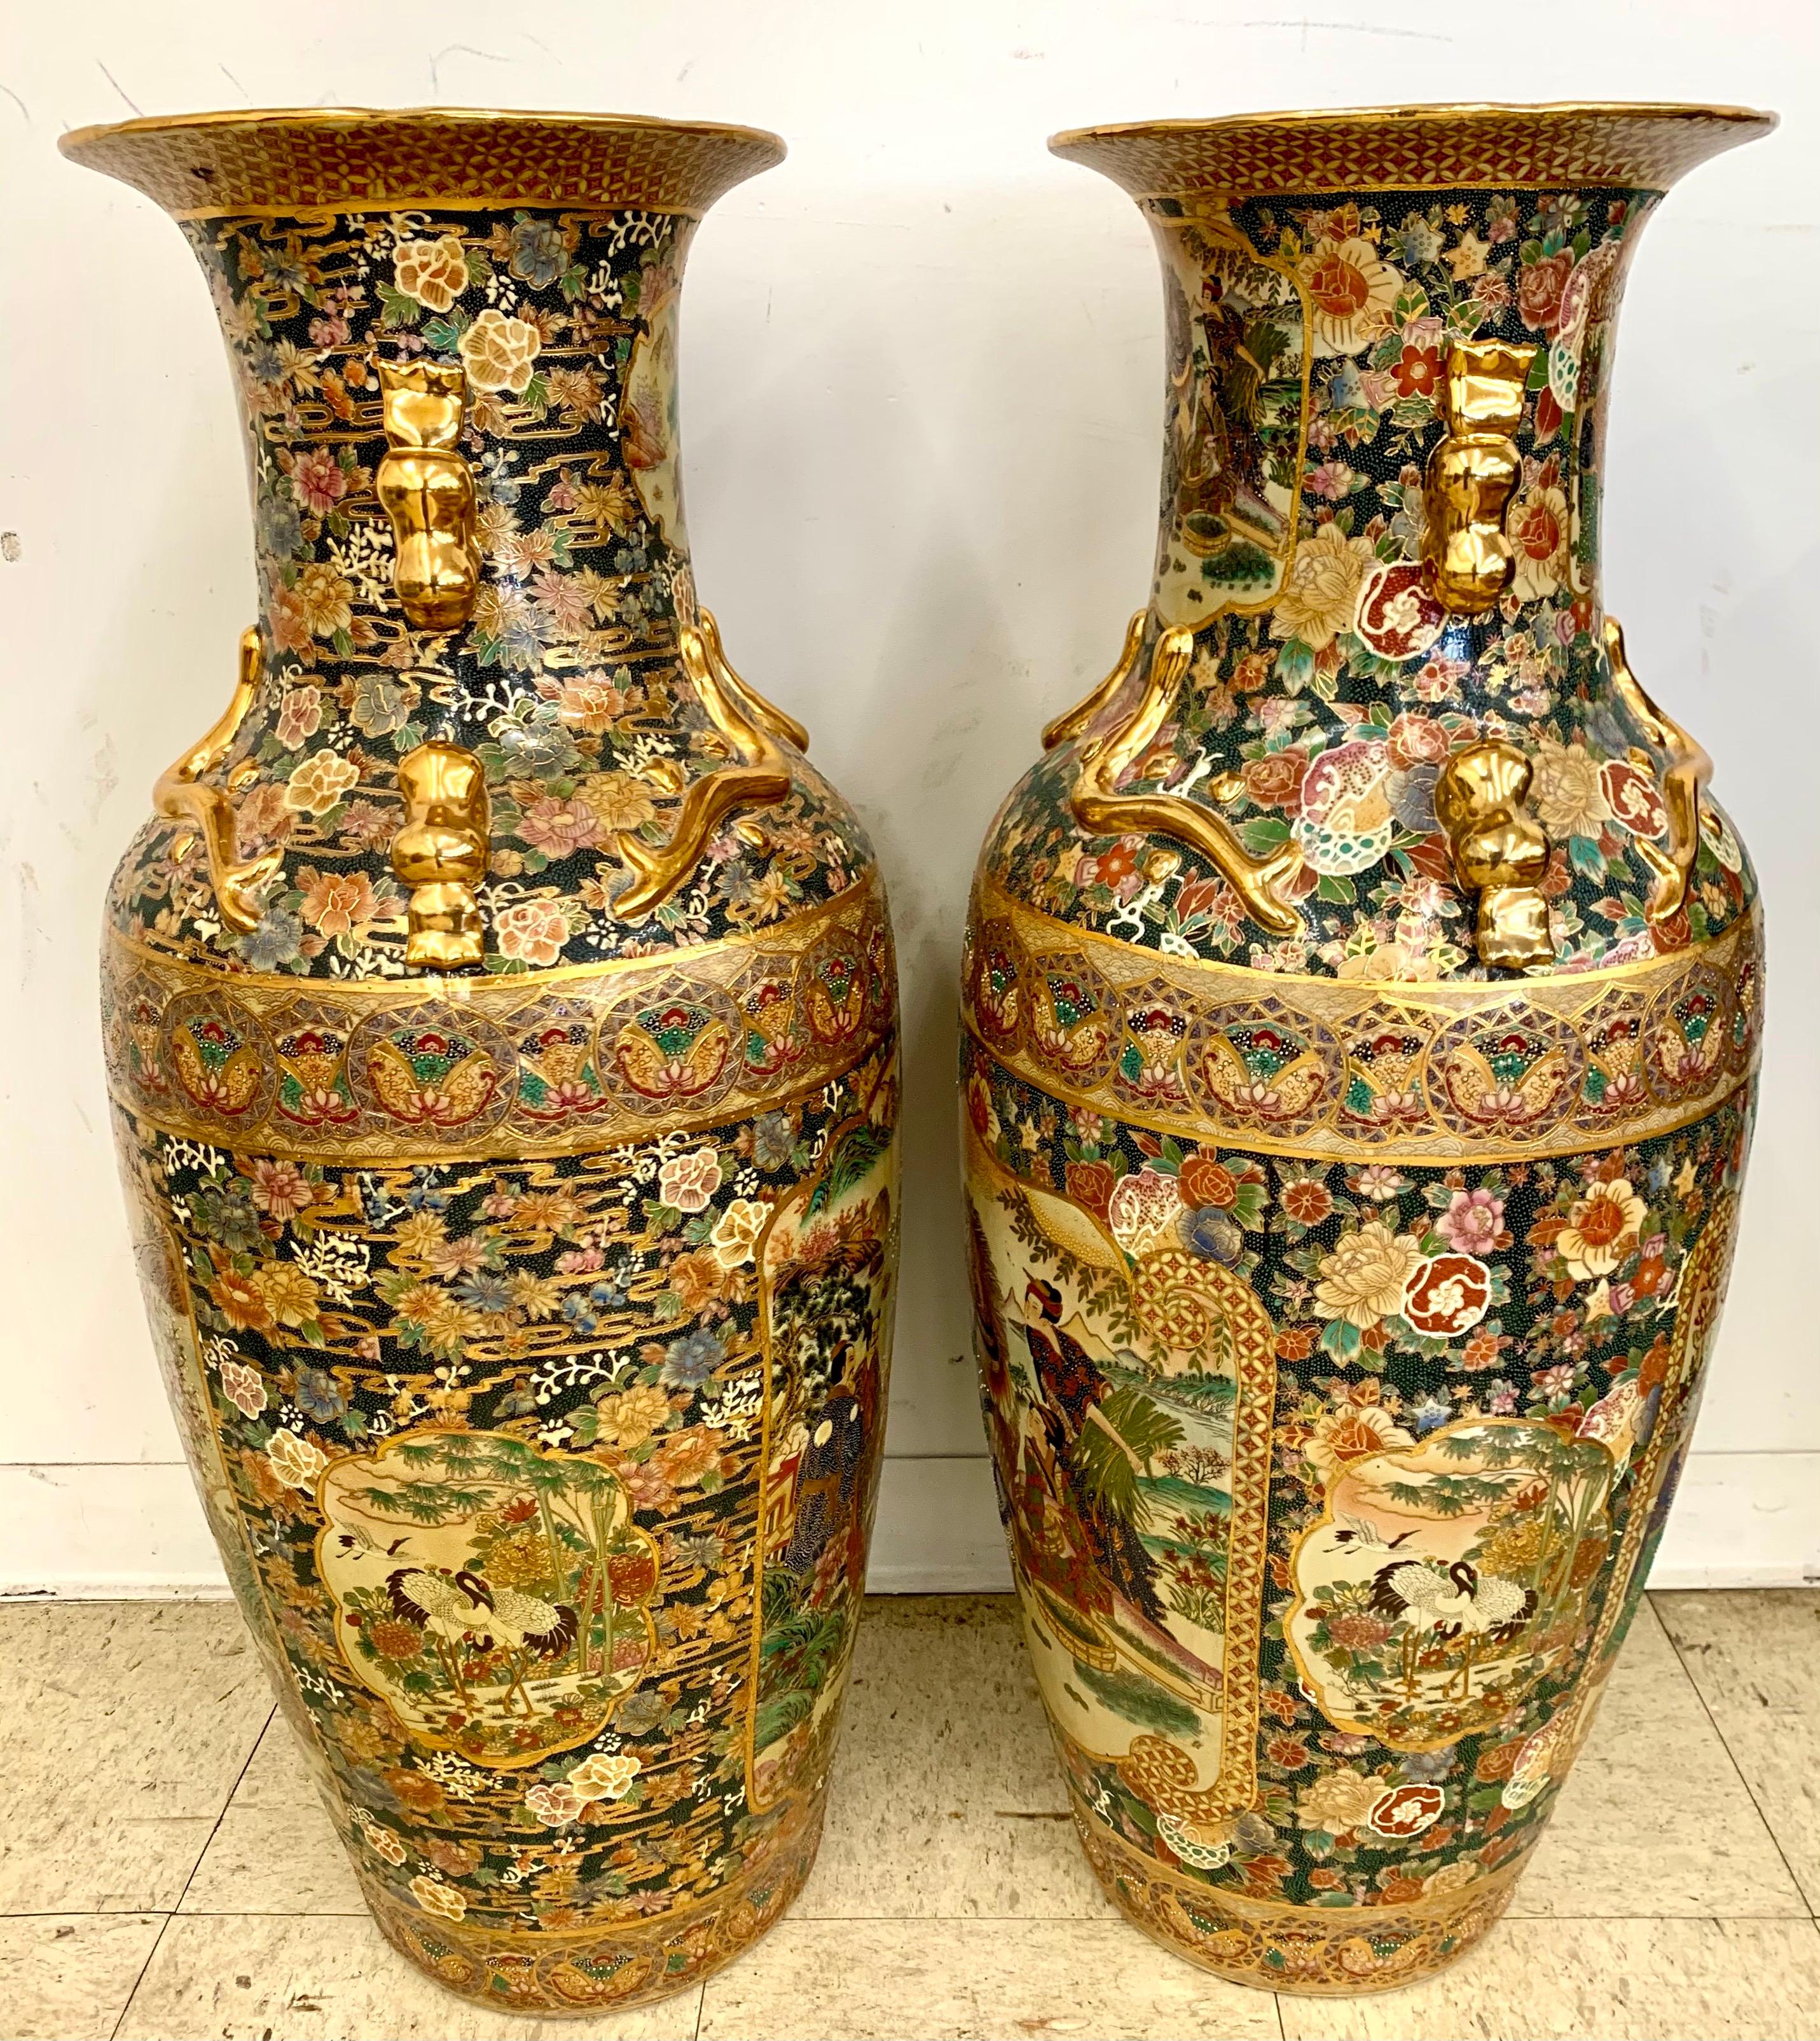 Stunning Japanese Satsuma porcelain vases having gilded decoration and intricately detailed hand painted inset panels depicting landscape scenery with mortals and samurai warriors.